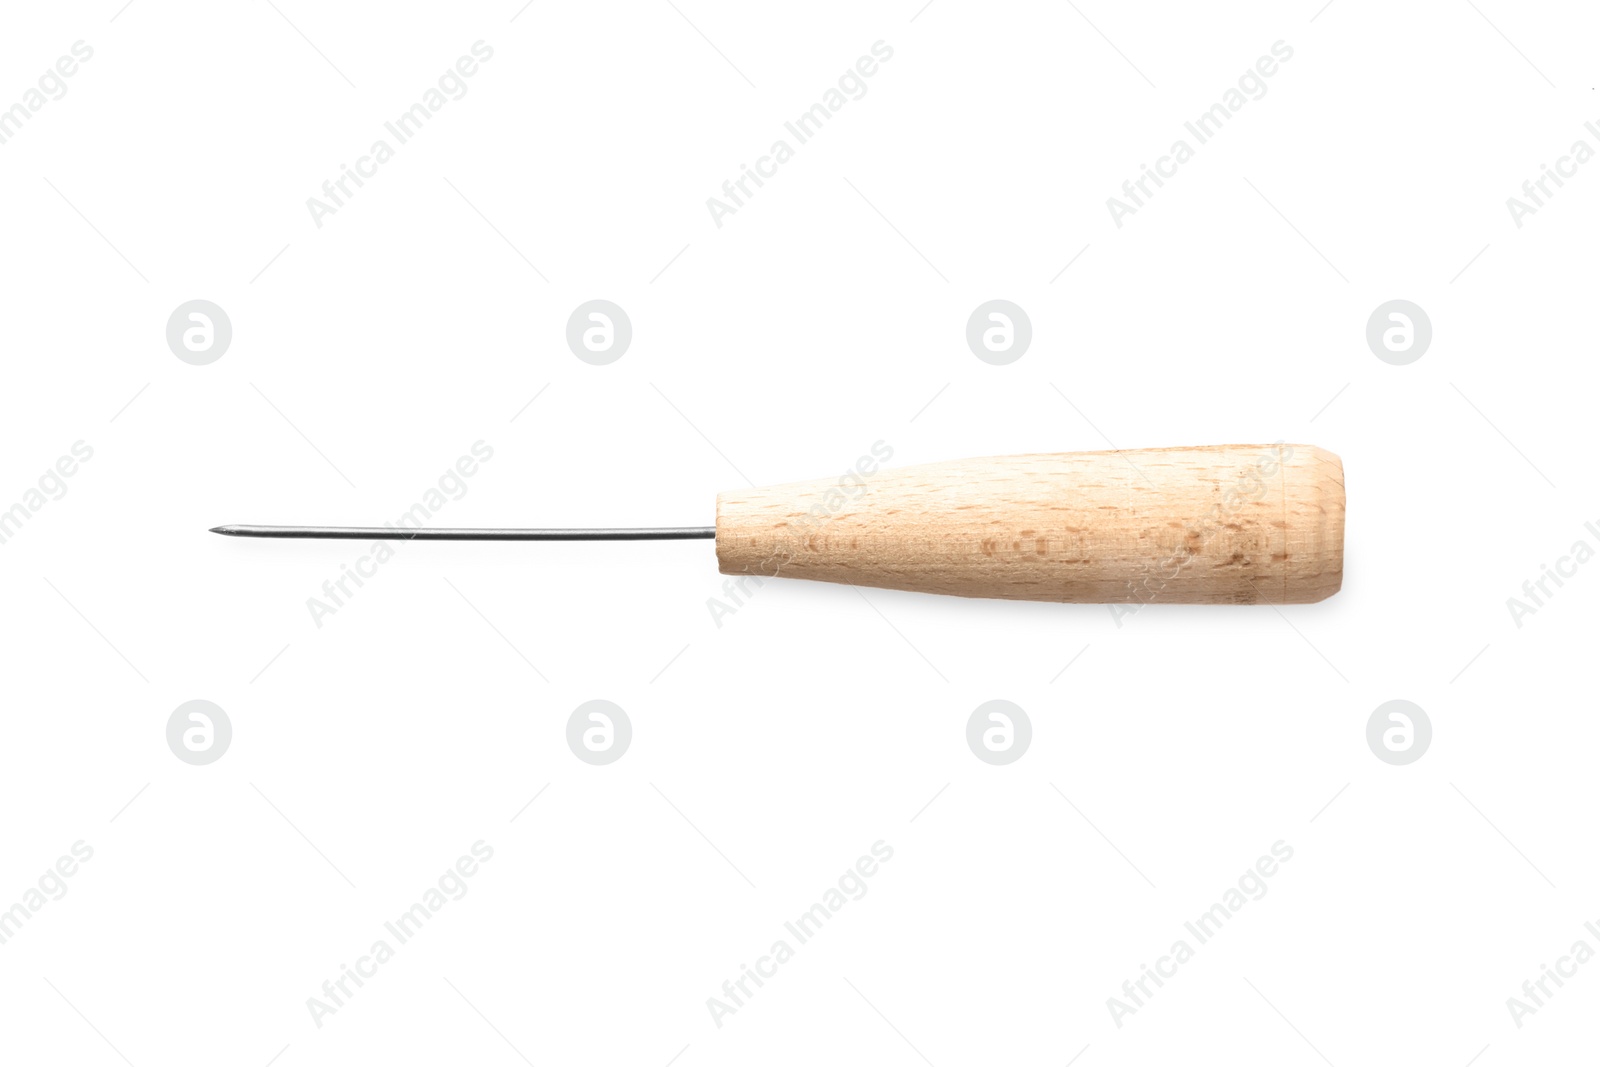 Photo of Stitching awl for leather working isolated on white, top view